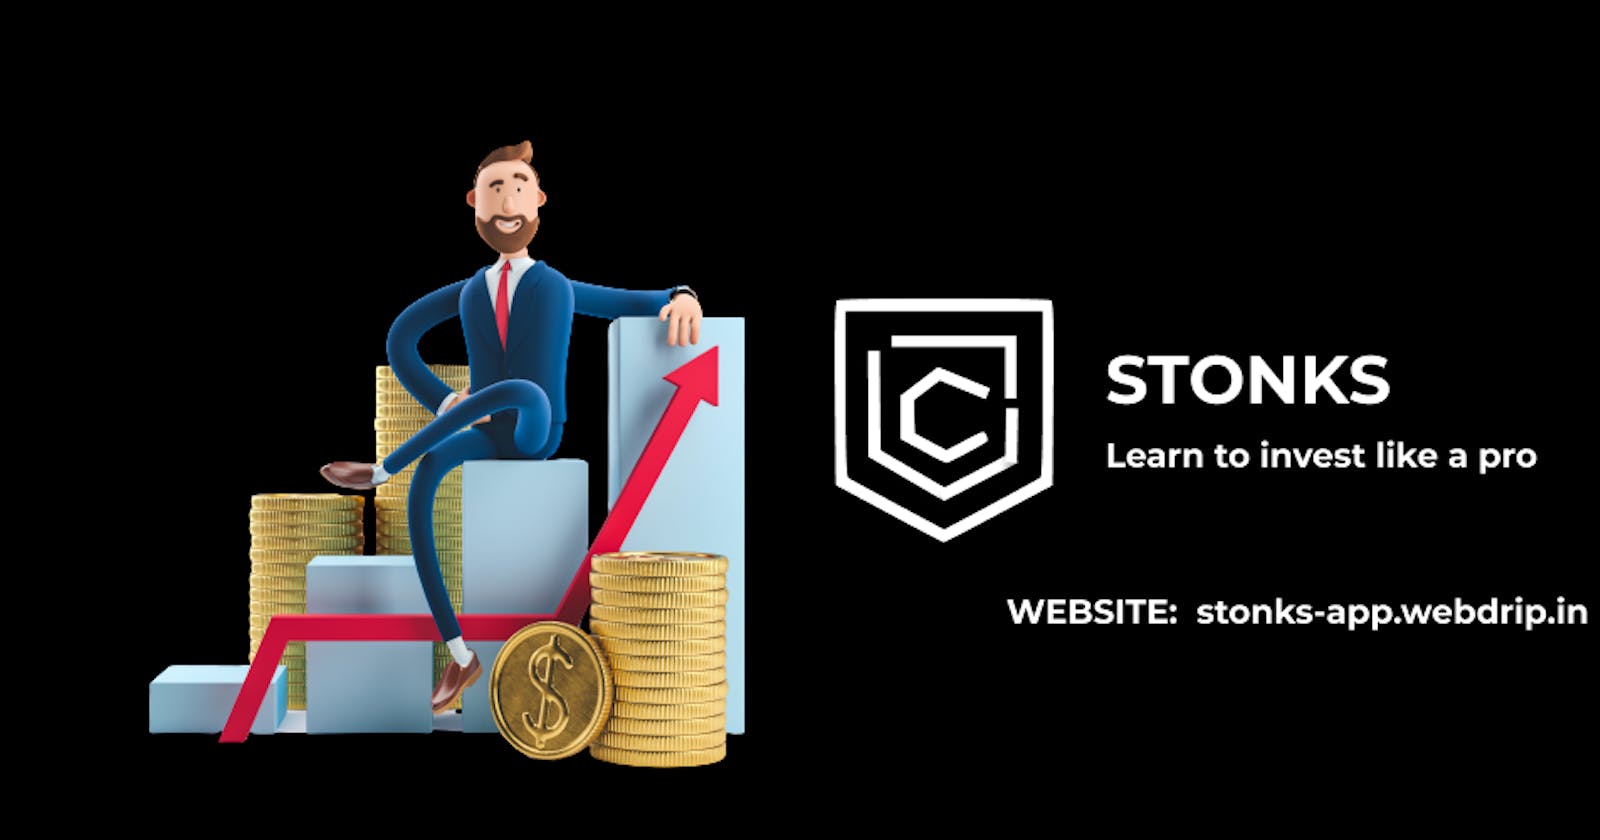 Stonks: Trading Simulator And A Positive Community For Learning Stock Market Trading